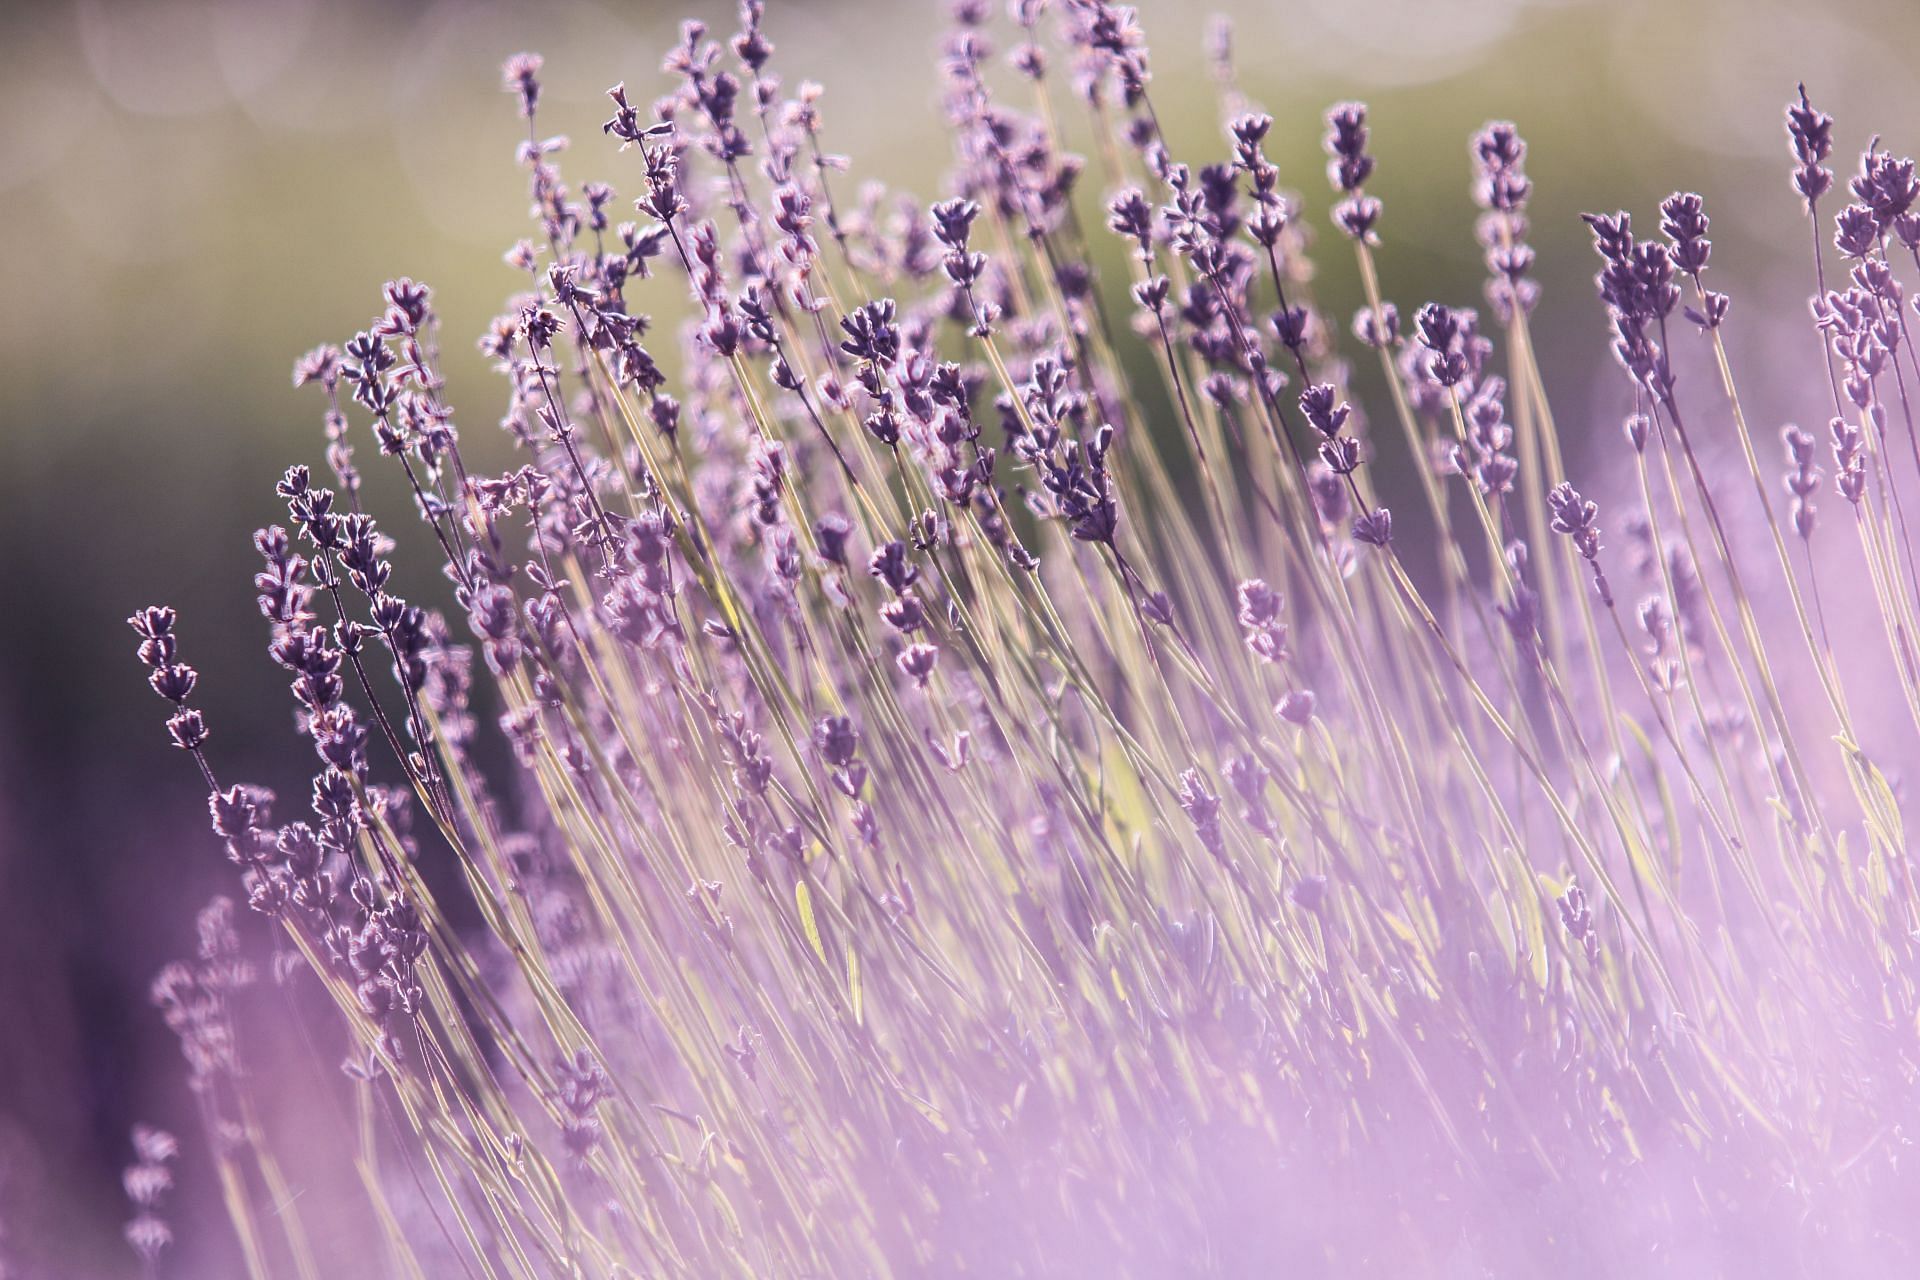 Natural herbs offer a safe and effective method to treat migraines. (Image via Pexels / Palo Cech)